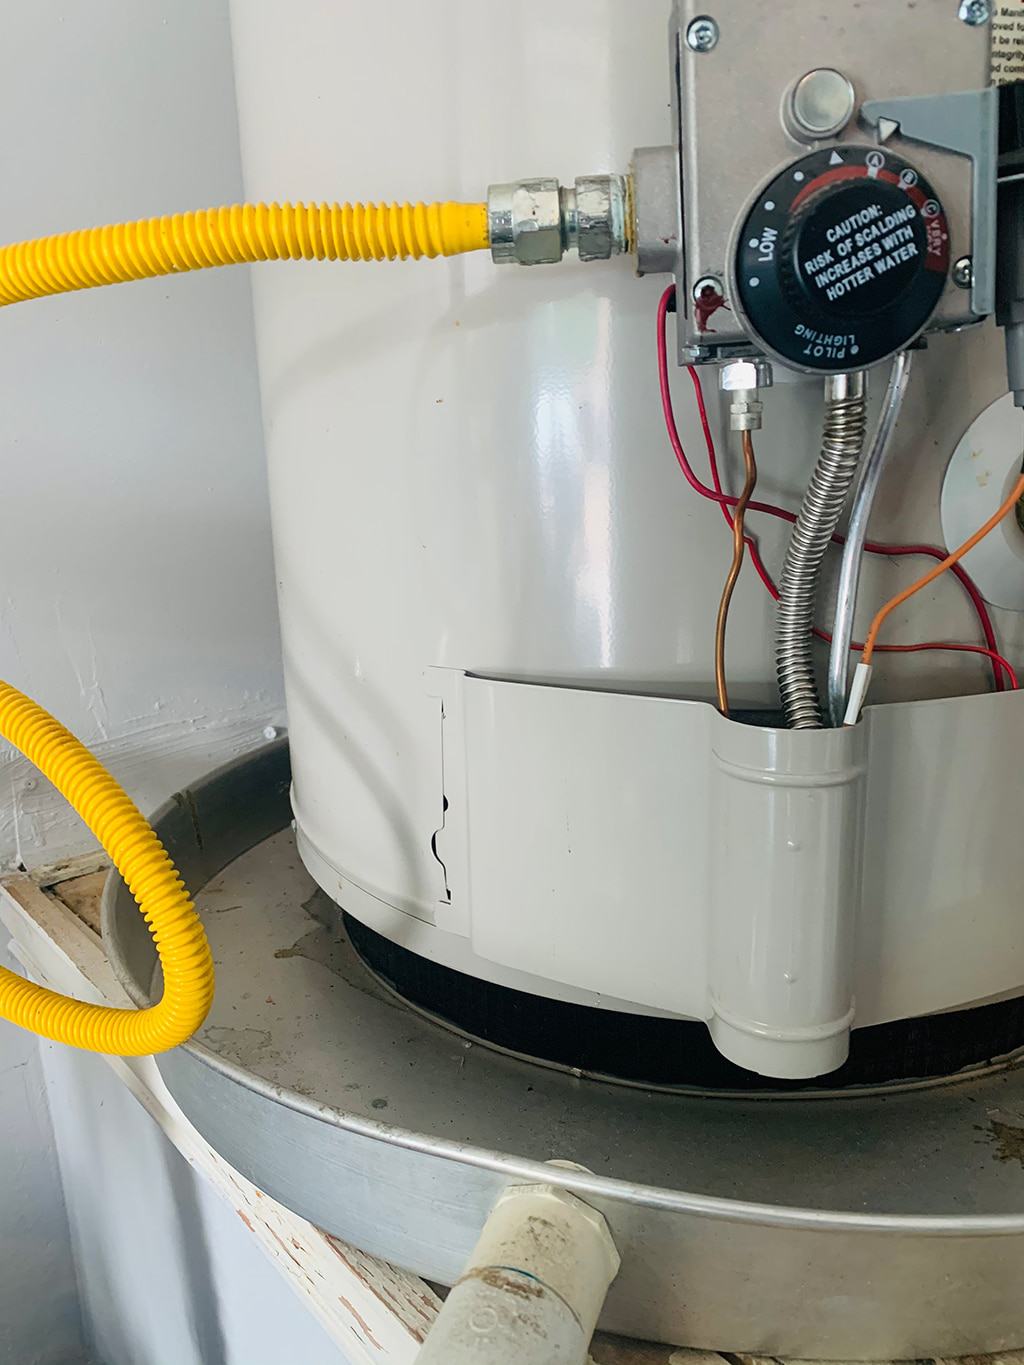 Quirk Or Doesn’t Work? Symptoms Of Water Heater Repair Problems And Normal Ways They Operate | Portland, OR